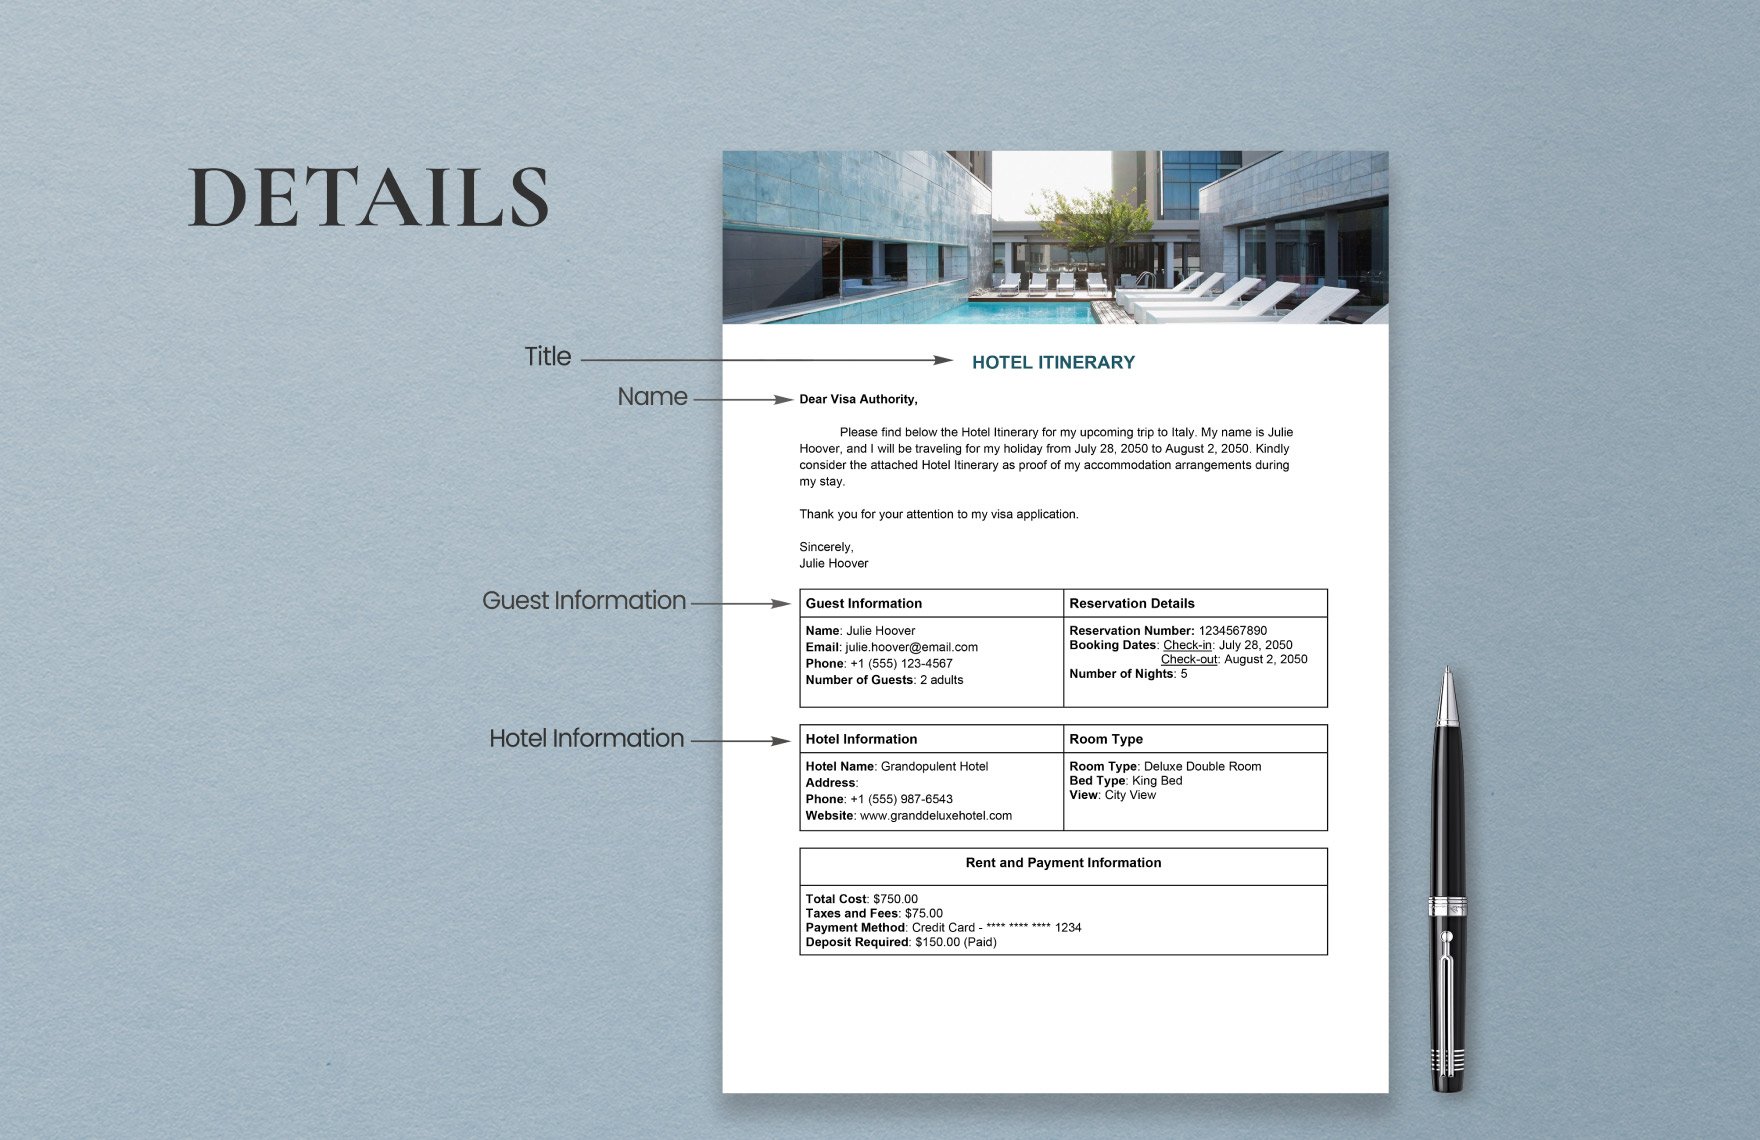 Hotel Itinerary Template